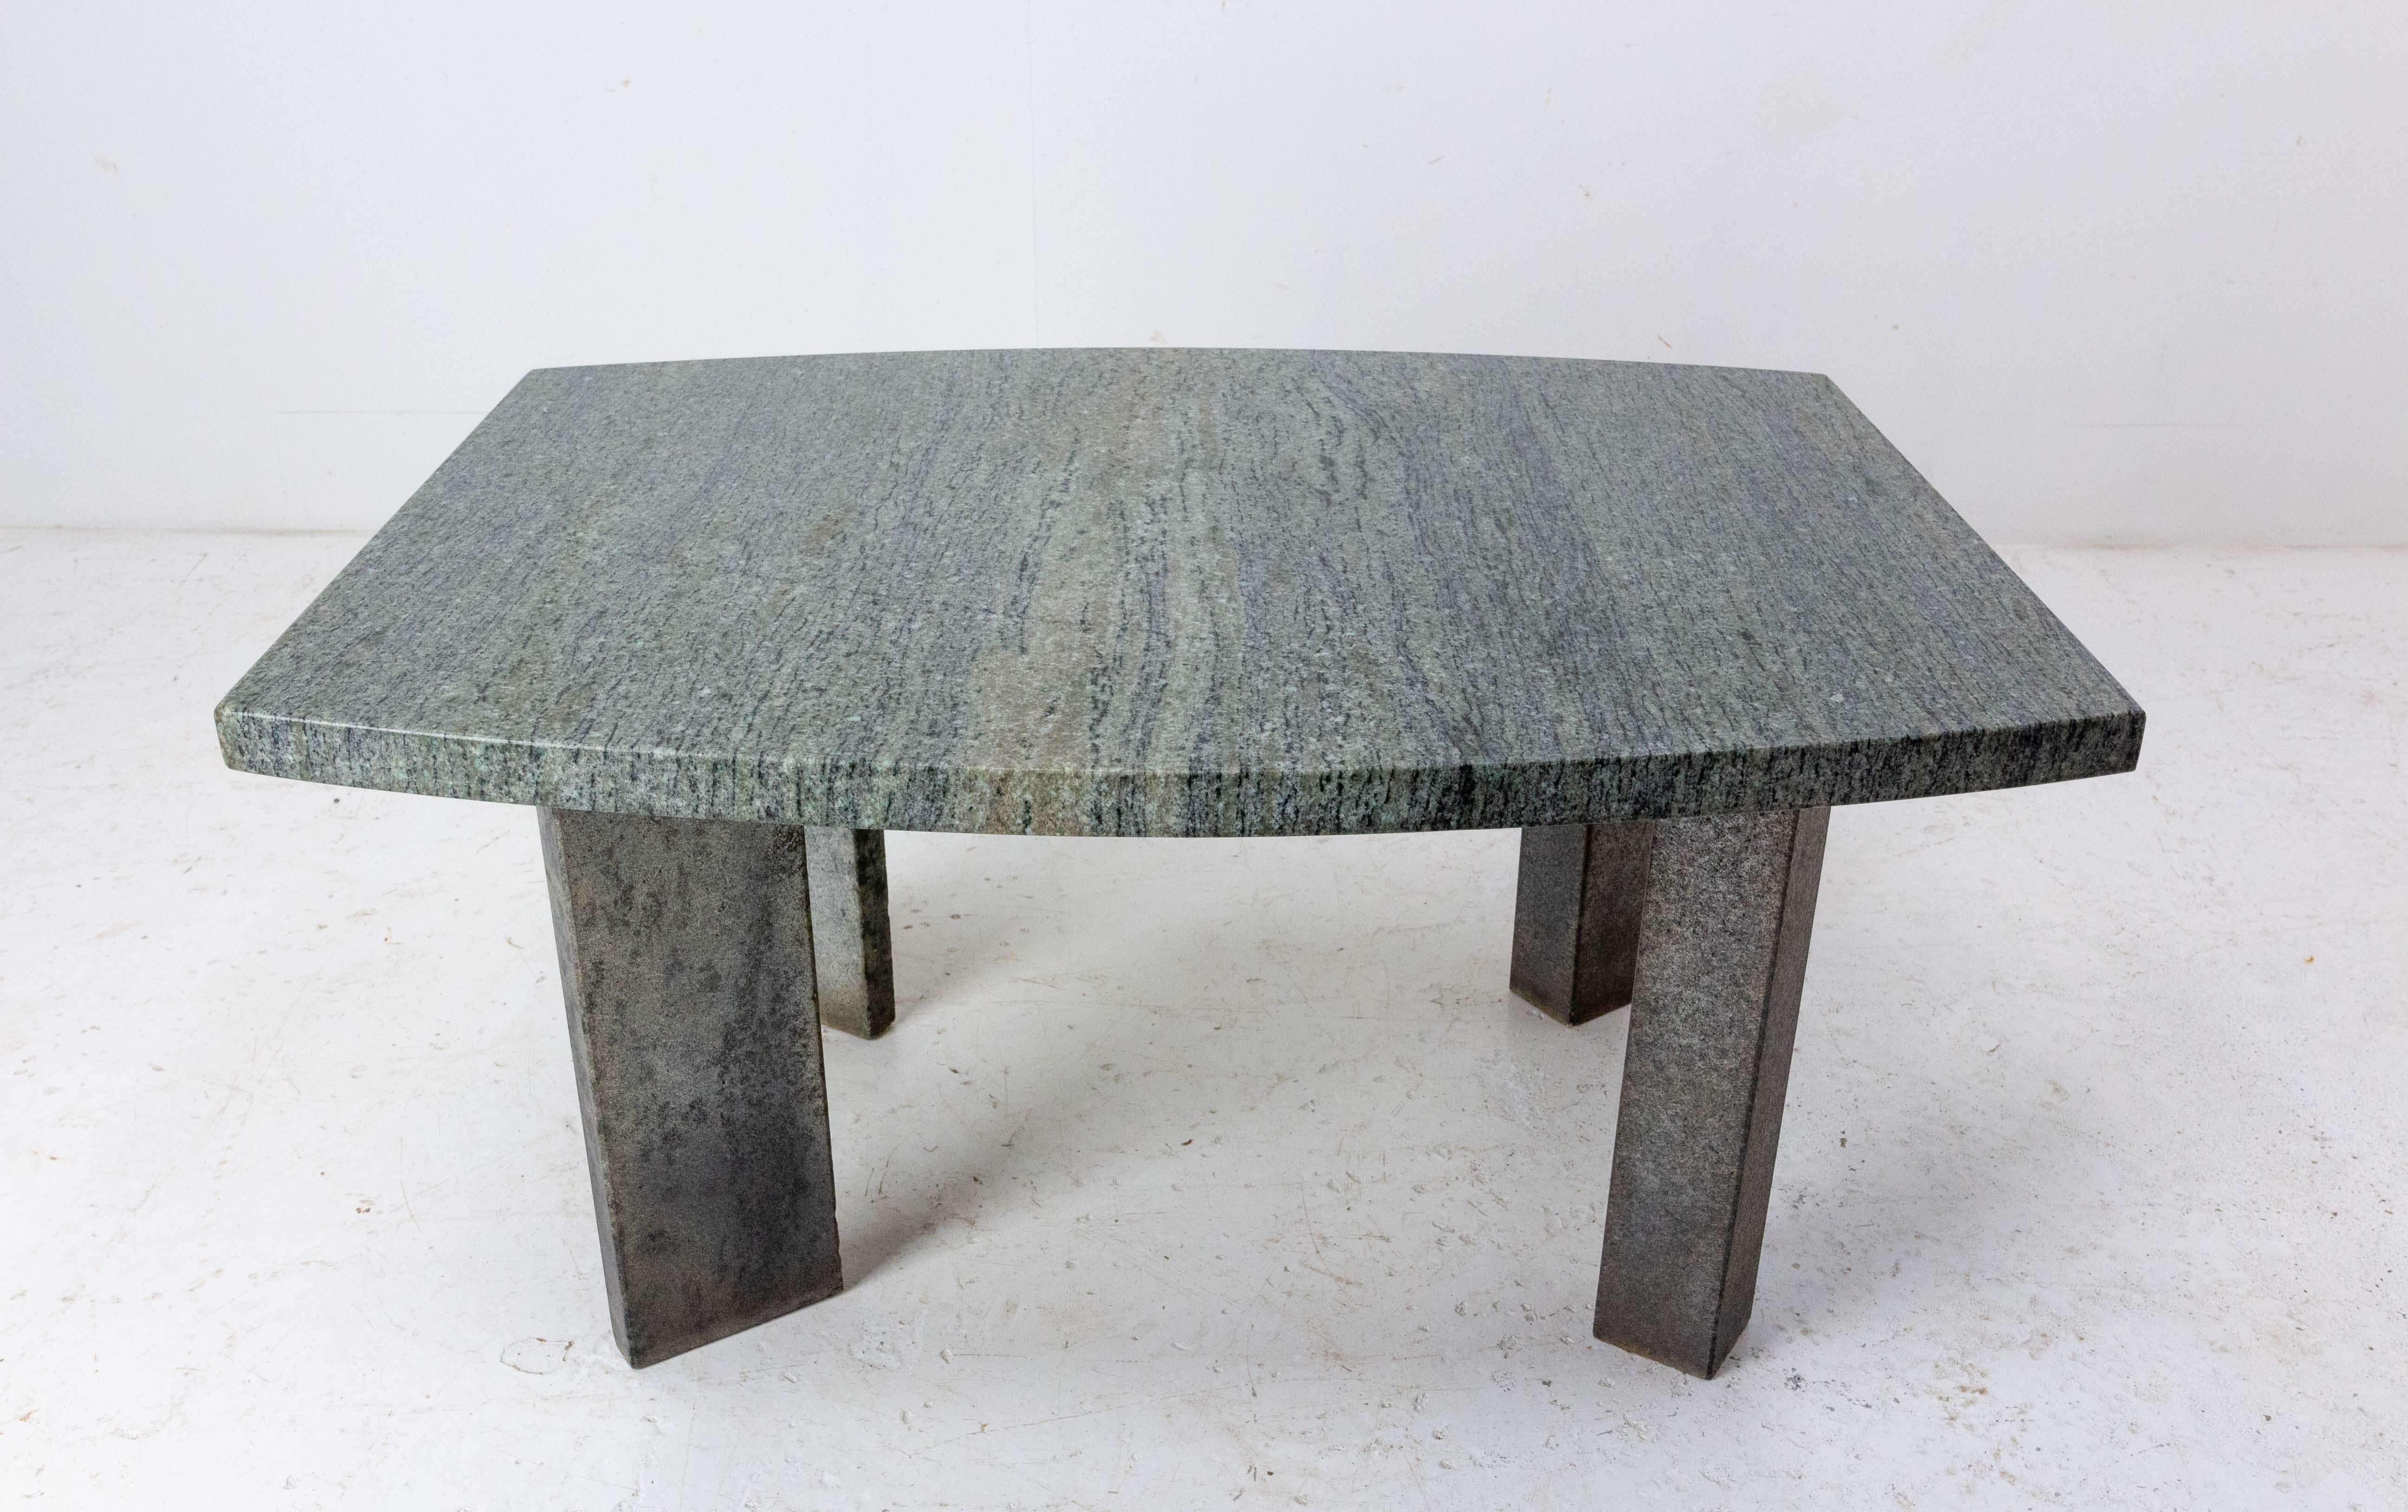 Granite Mid-Century Modern coffee table
French circa 1970
In good condition. 

Shipping:
L 81 P63 H40,5 61 kg